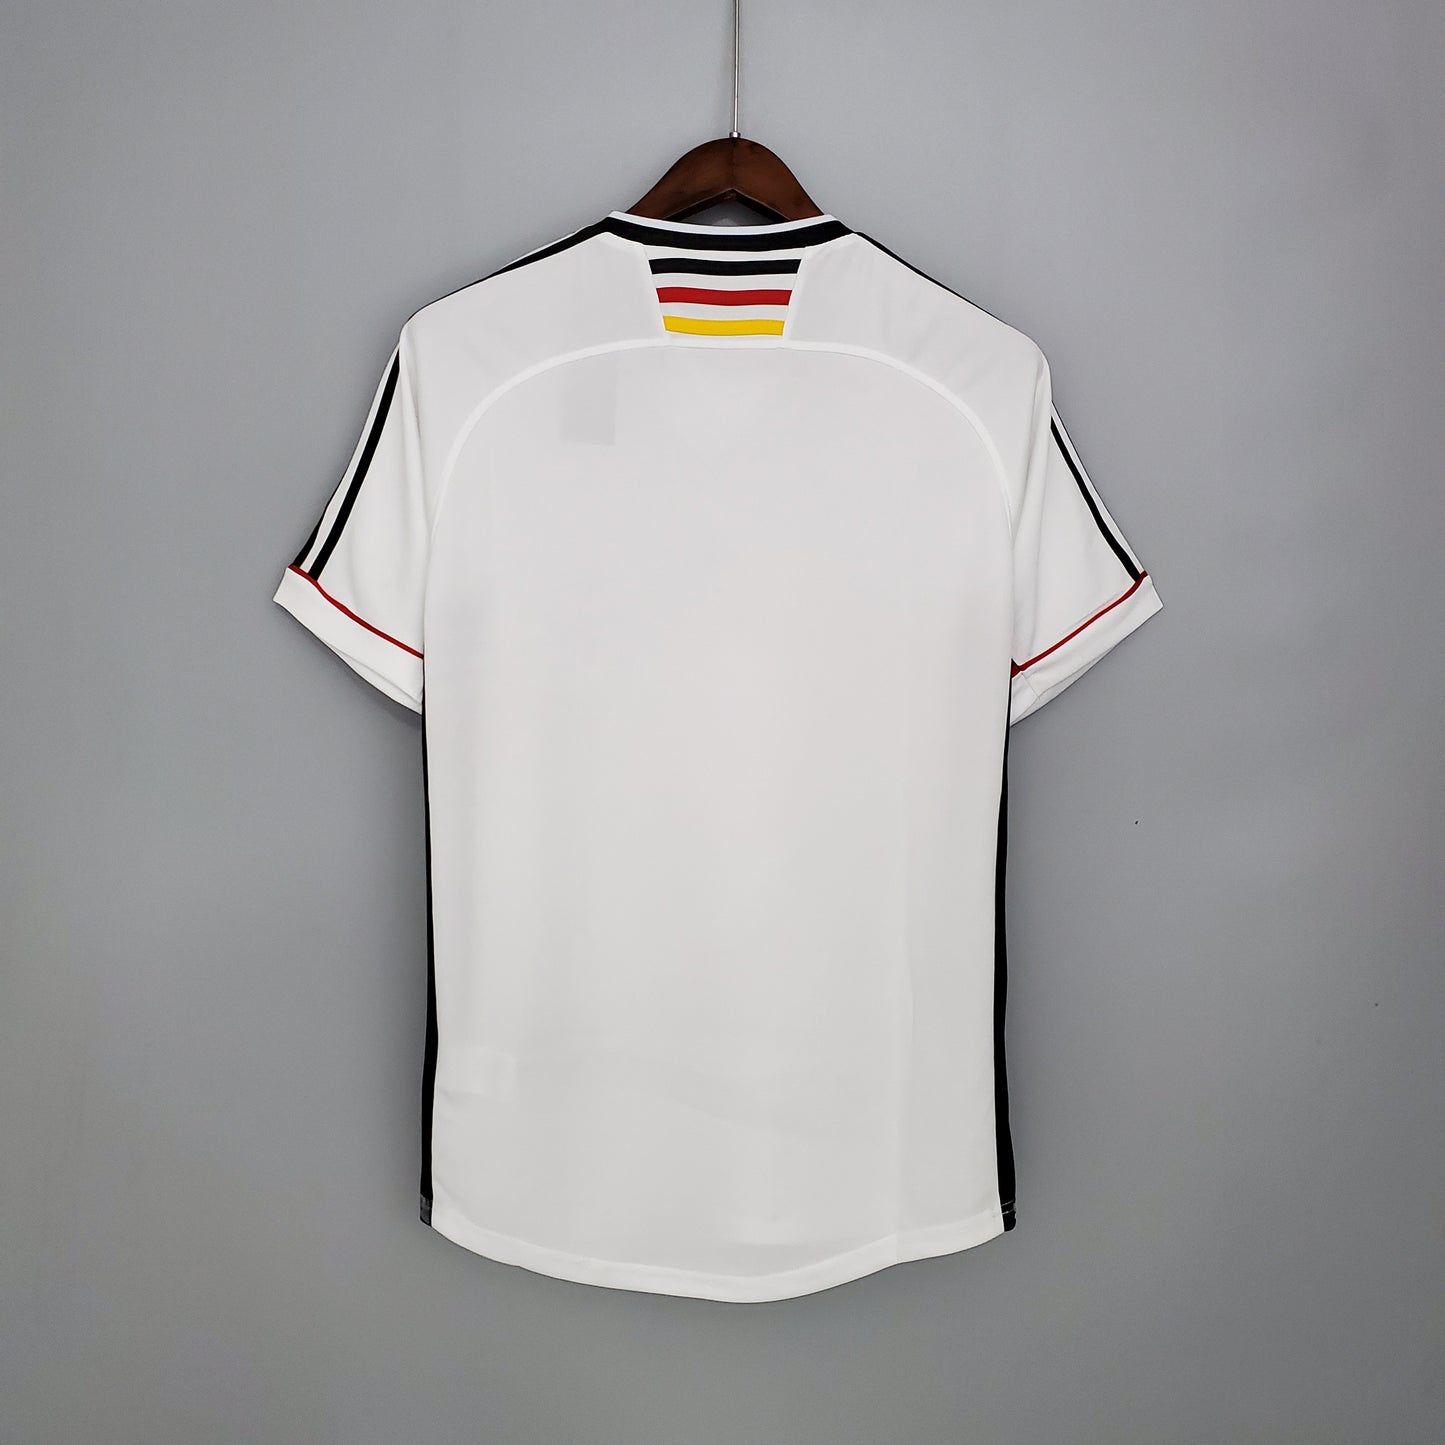 Germany 1998 Home Jersey